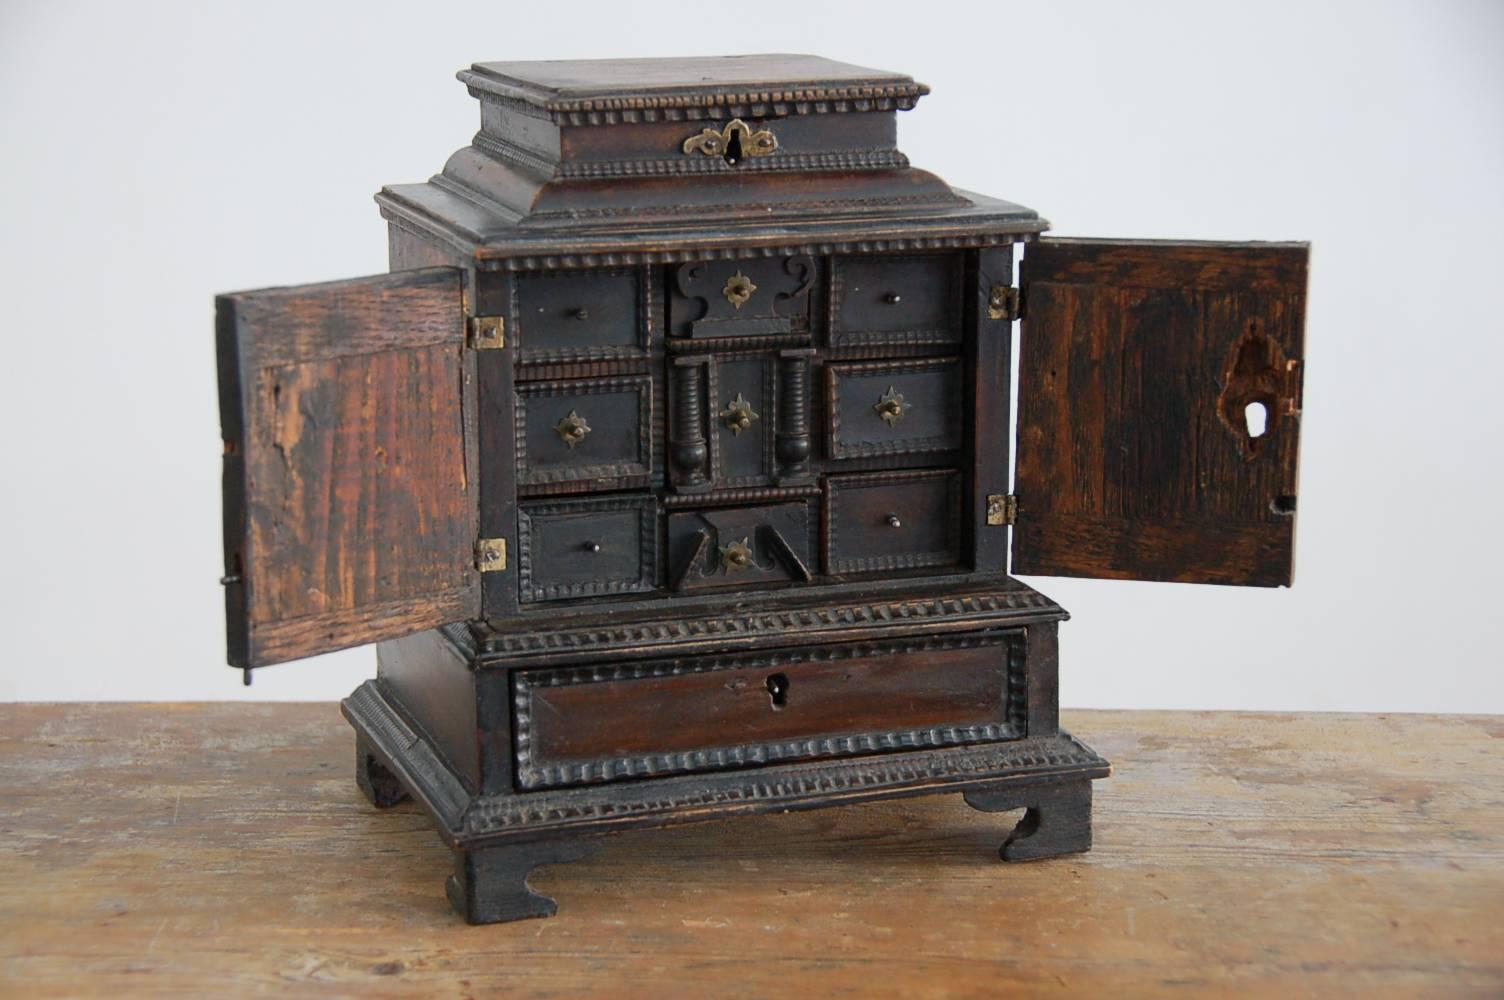 Remarkable 17th century tiny Baroque cabinet, origin: South Germany, circa 1680.

This miniature cabinet, which mimics the shape of full-size cabinets of the later seventeenth century, is a great rarity. The interior is fitted with ten small drawers